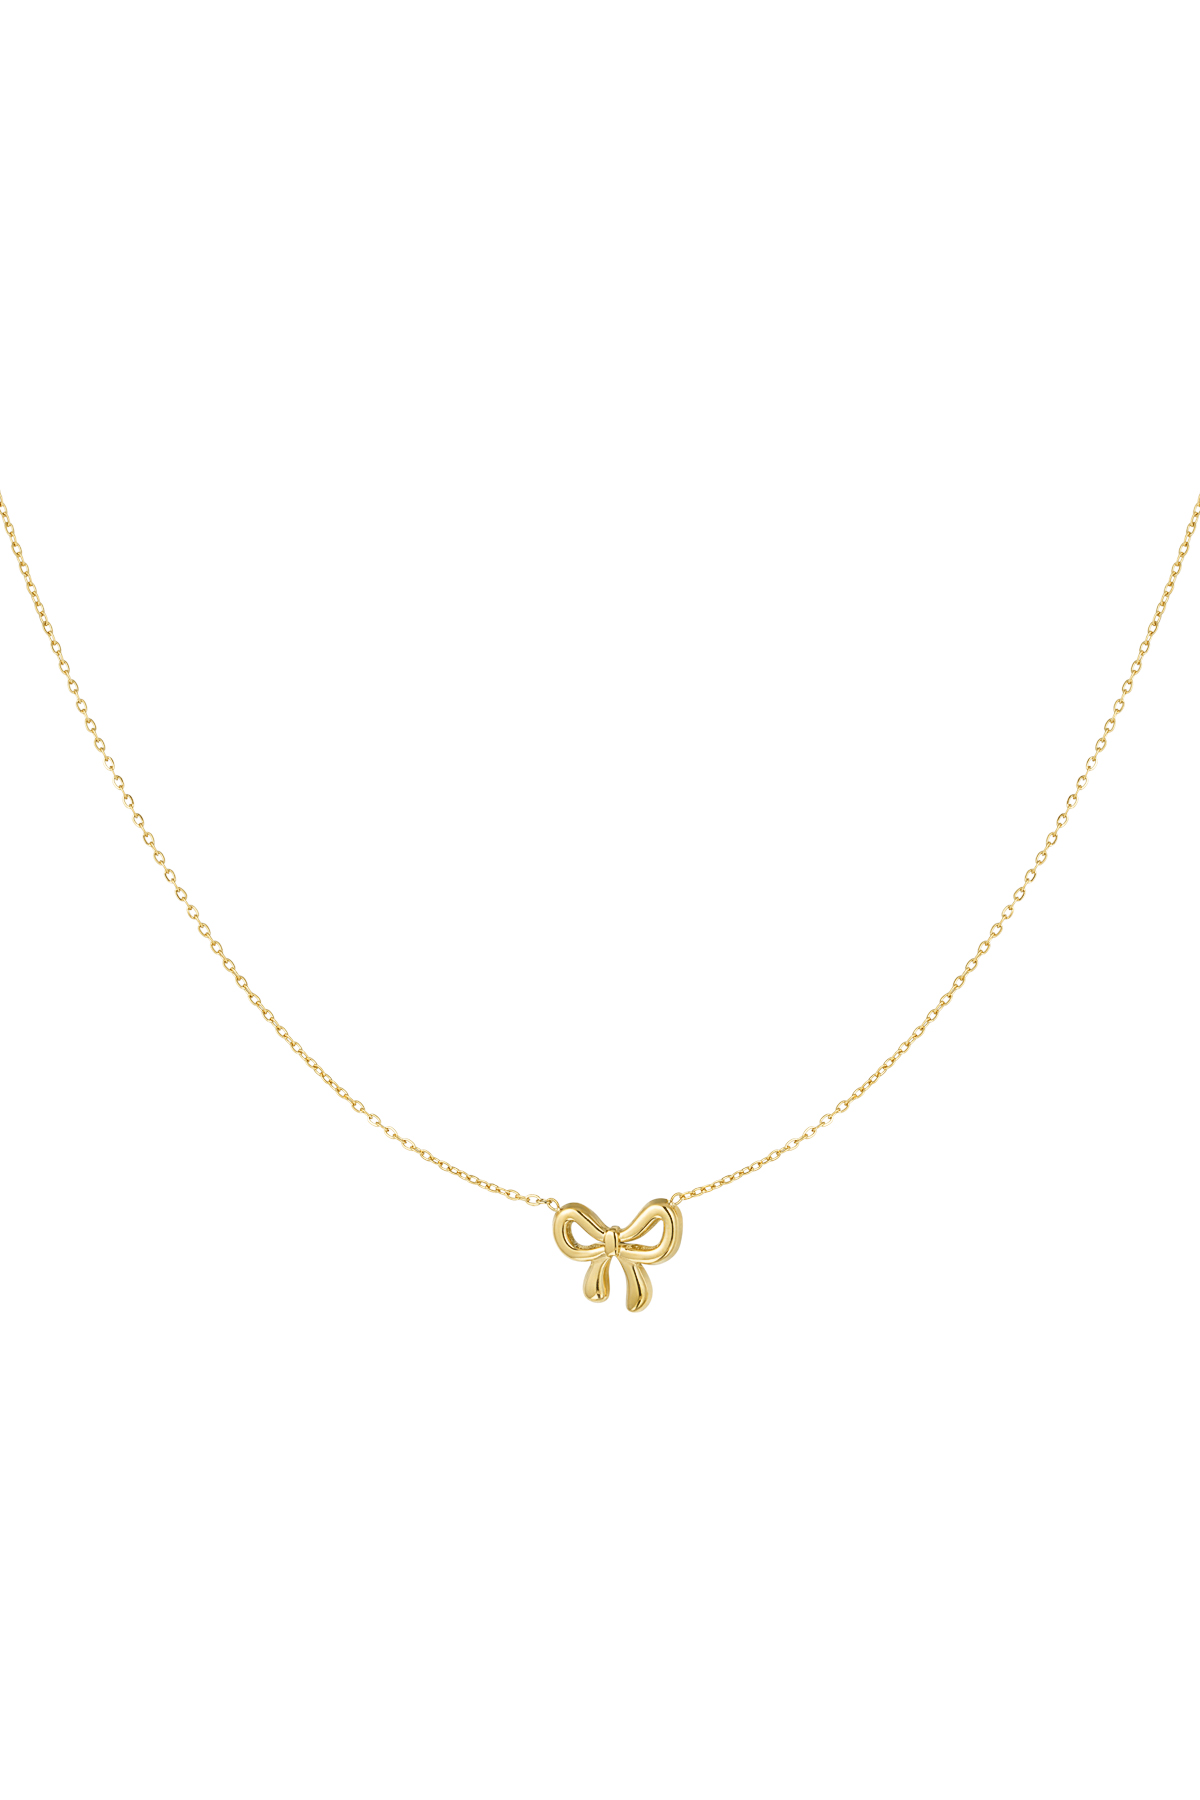 Simple bow necklace - gold 